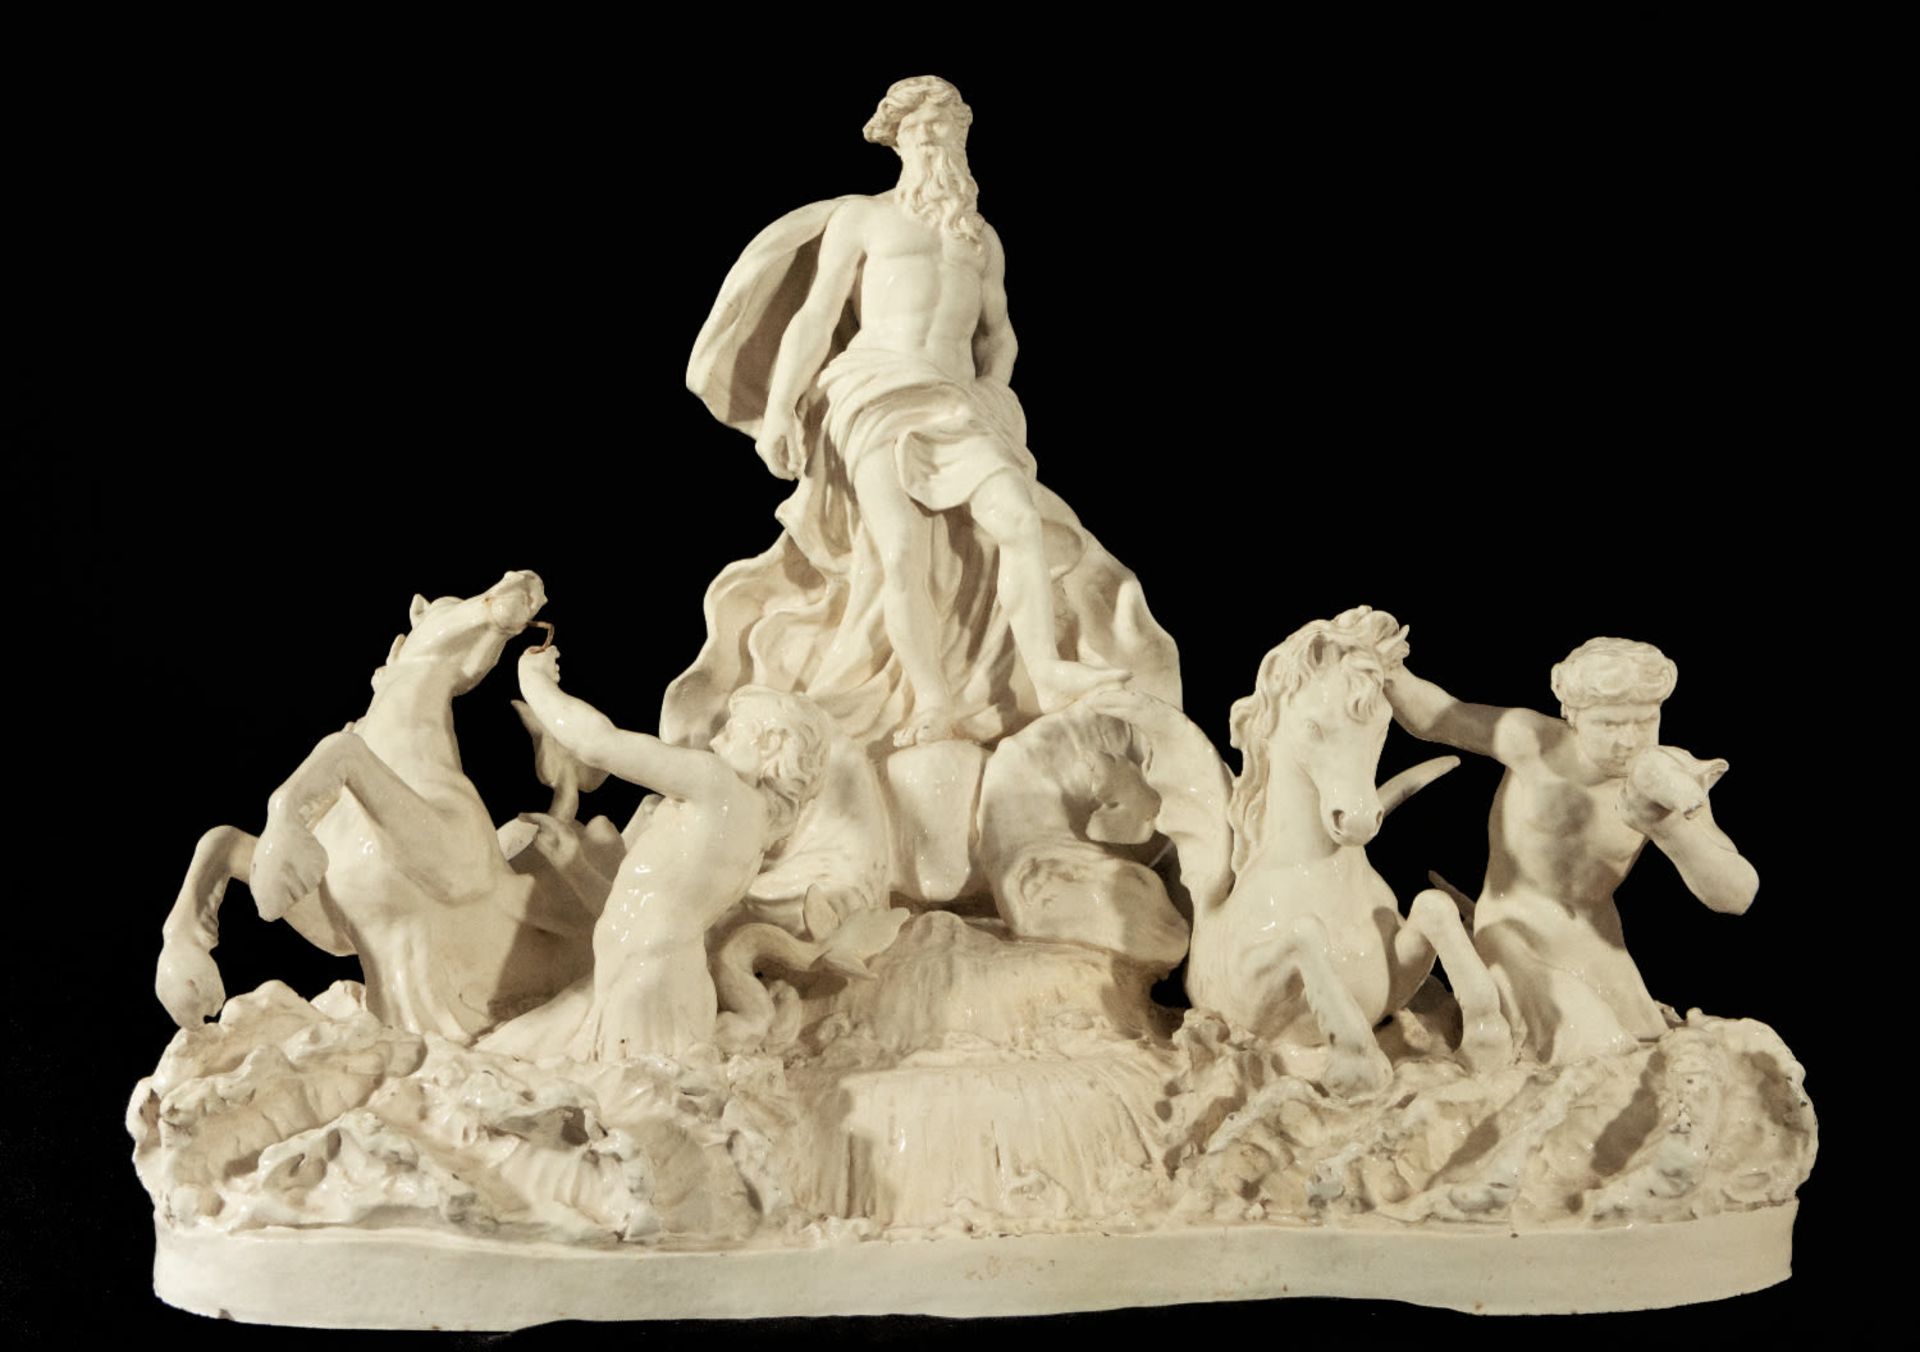 The Triumph of Neptune, an important large ceramic group from the Royal Factory of Capodimonte from 